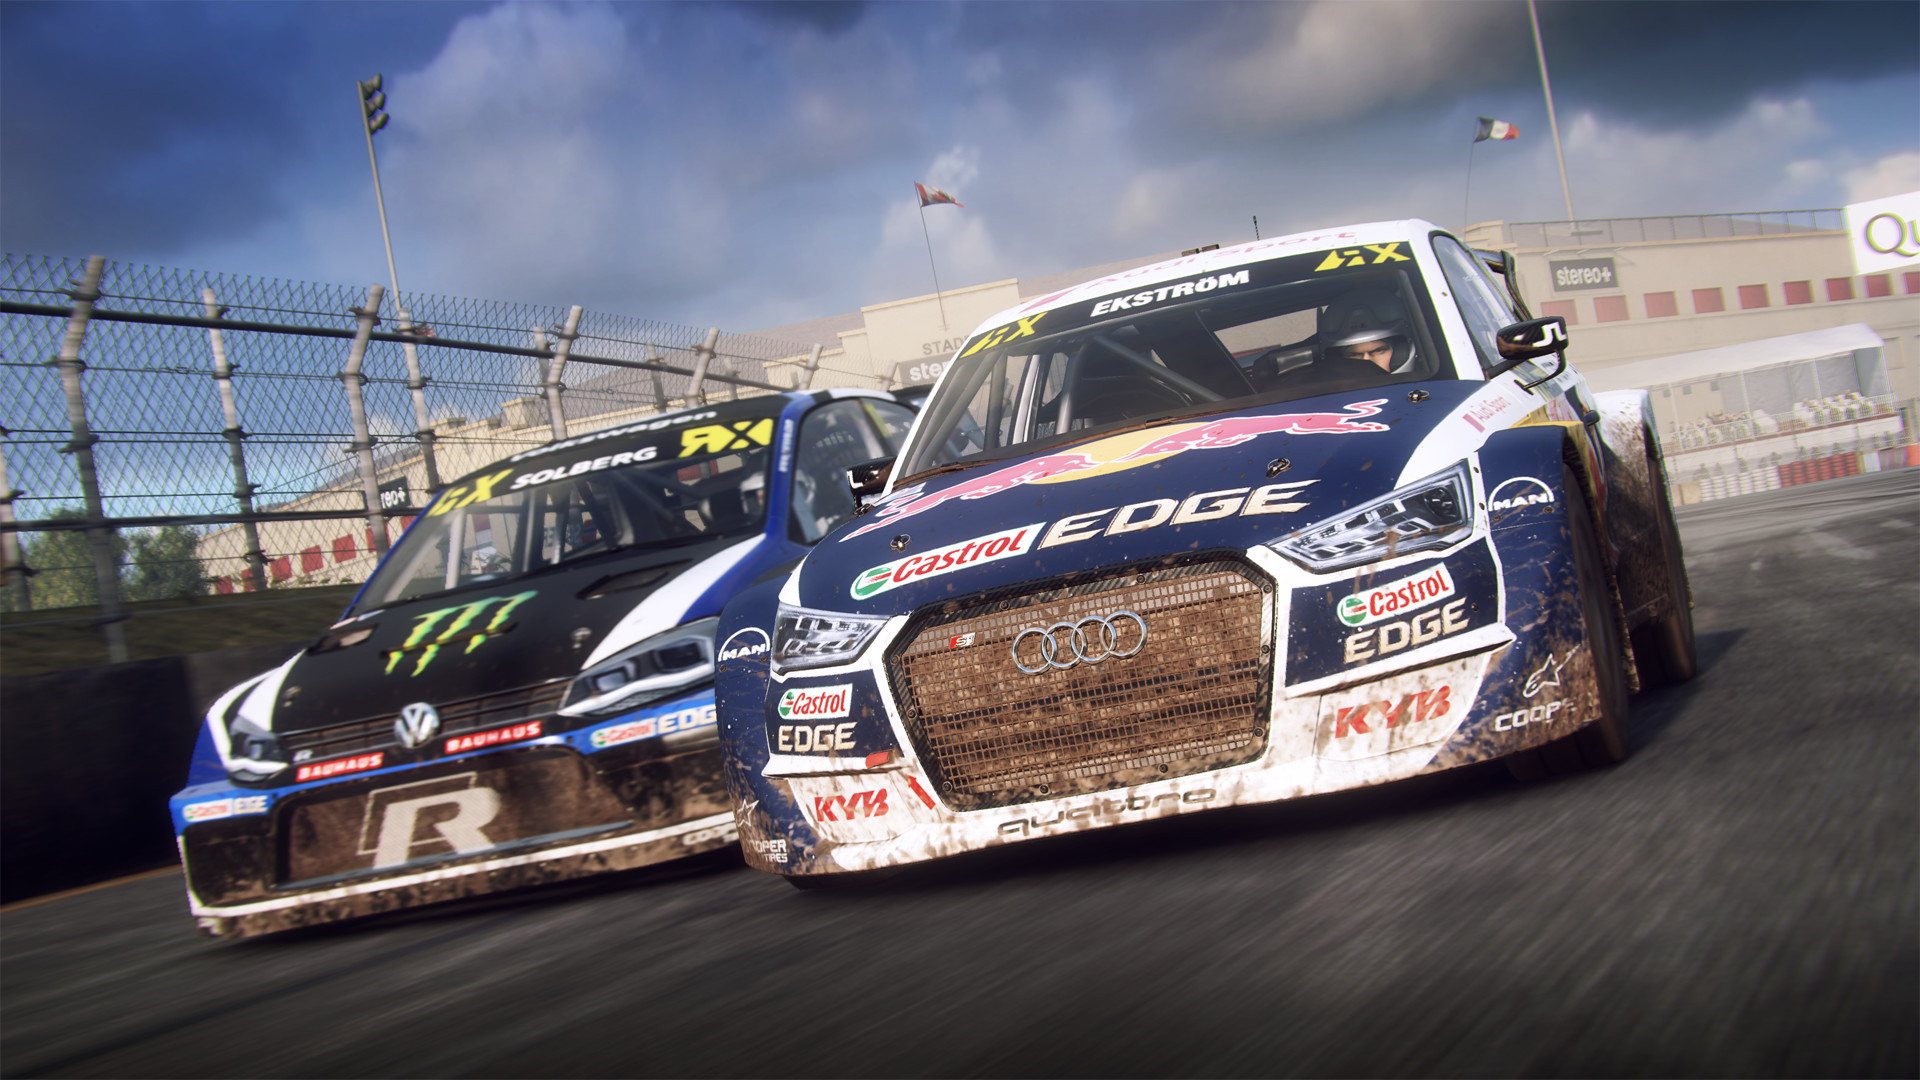 DiRT Rally 2.0 Game Of The Year Edition PlayStation 5 Account